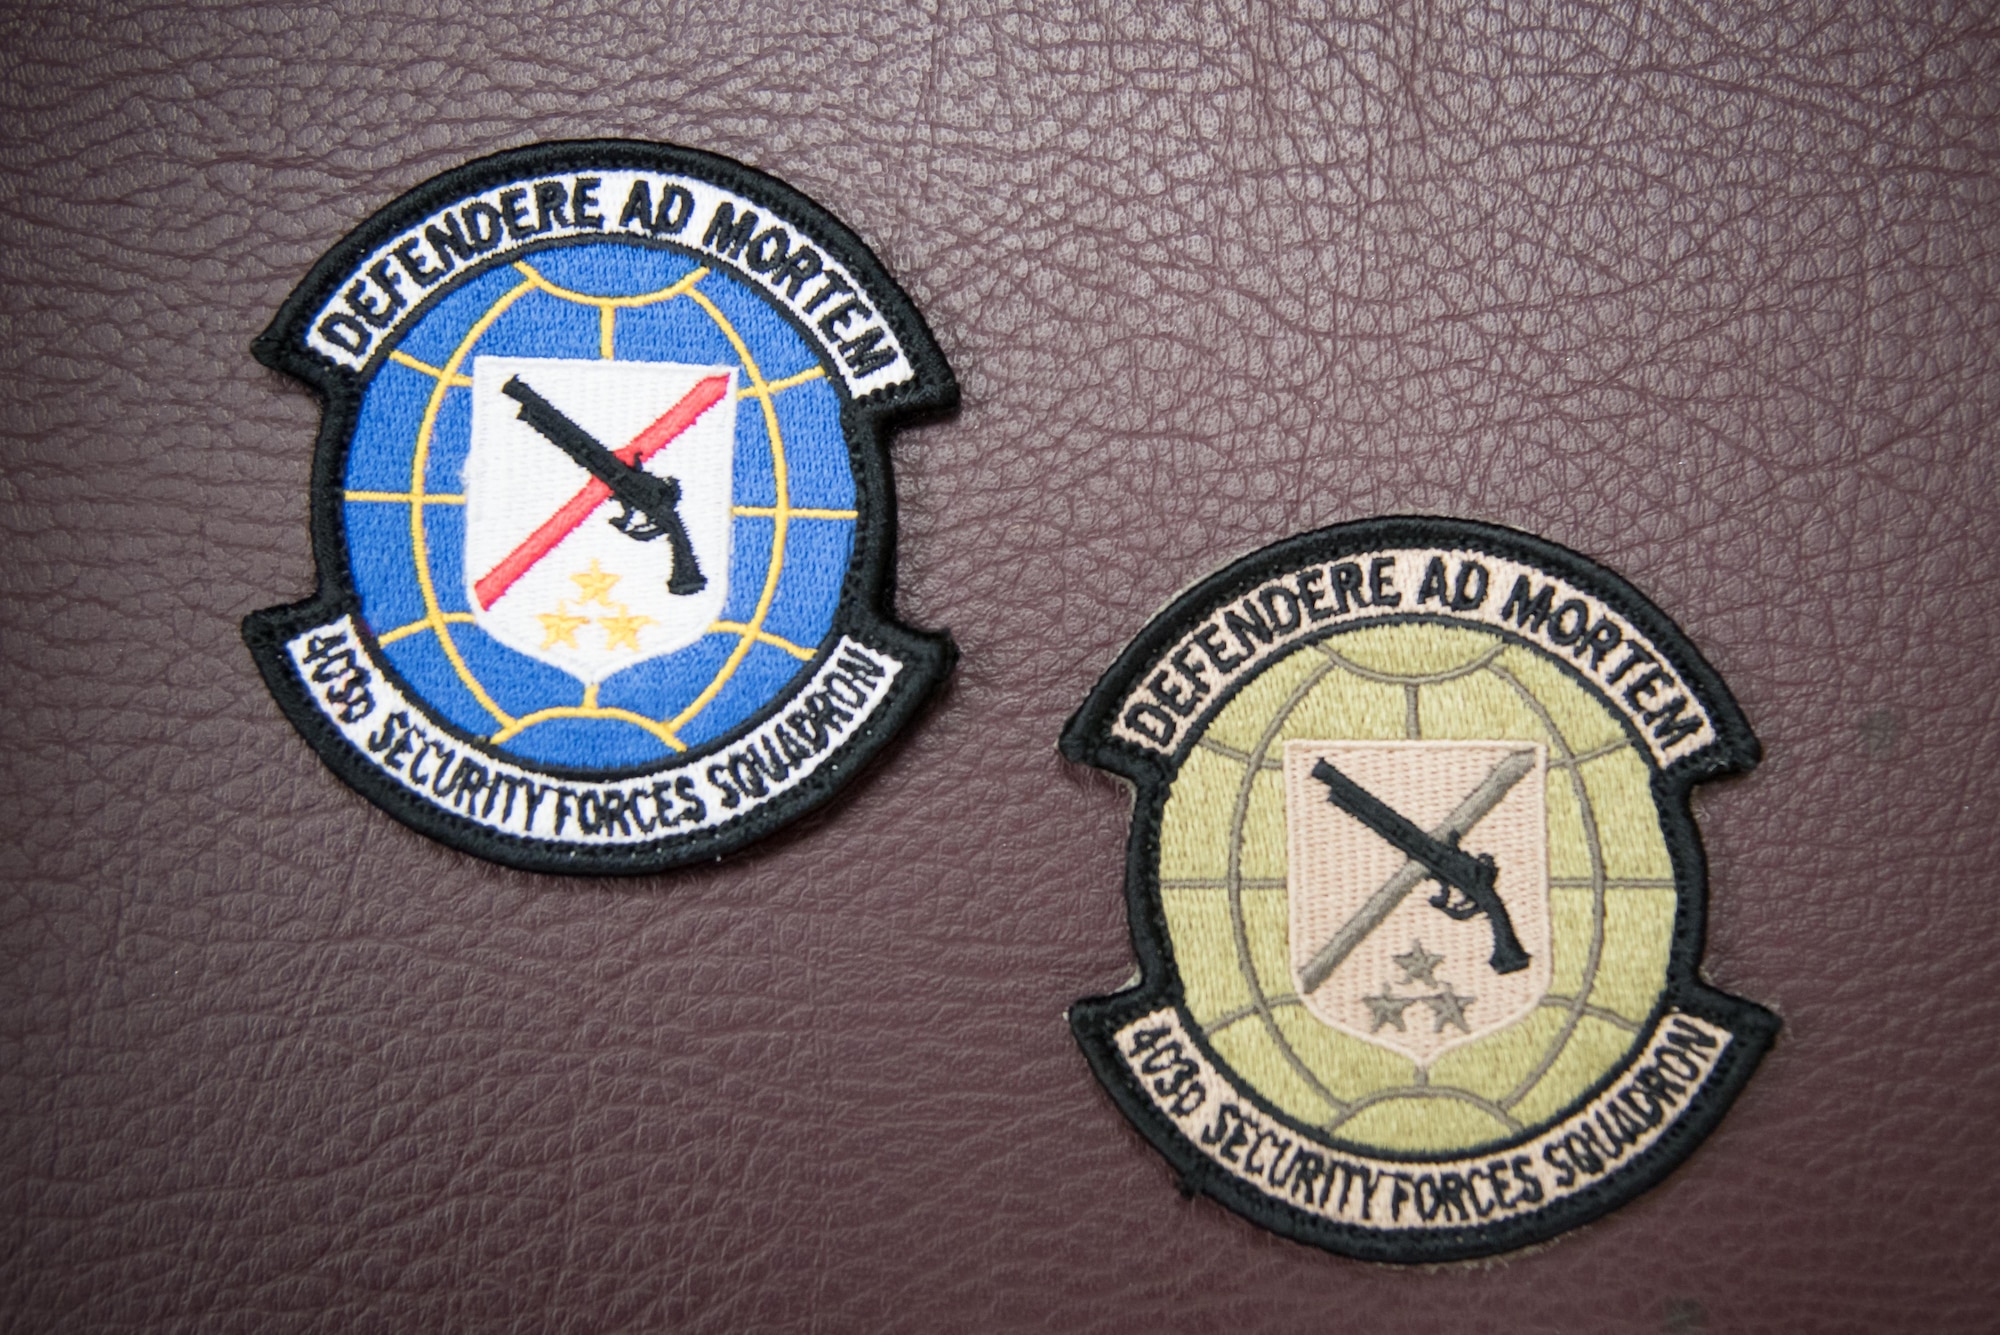 The 403rd Security Forces Squadron unit patch rests on a chair at Keesler Air Force Base, Mississippi Nov. 7, 2017. (U.S. Air Force photo by Staff Sgt. Heather Heiney)